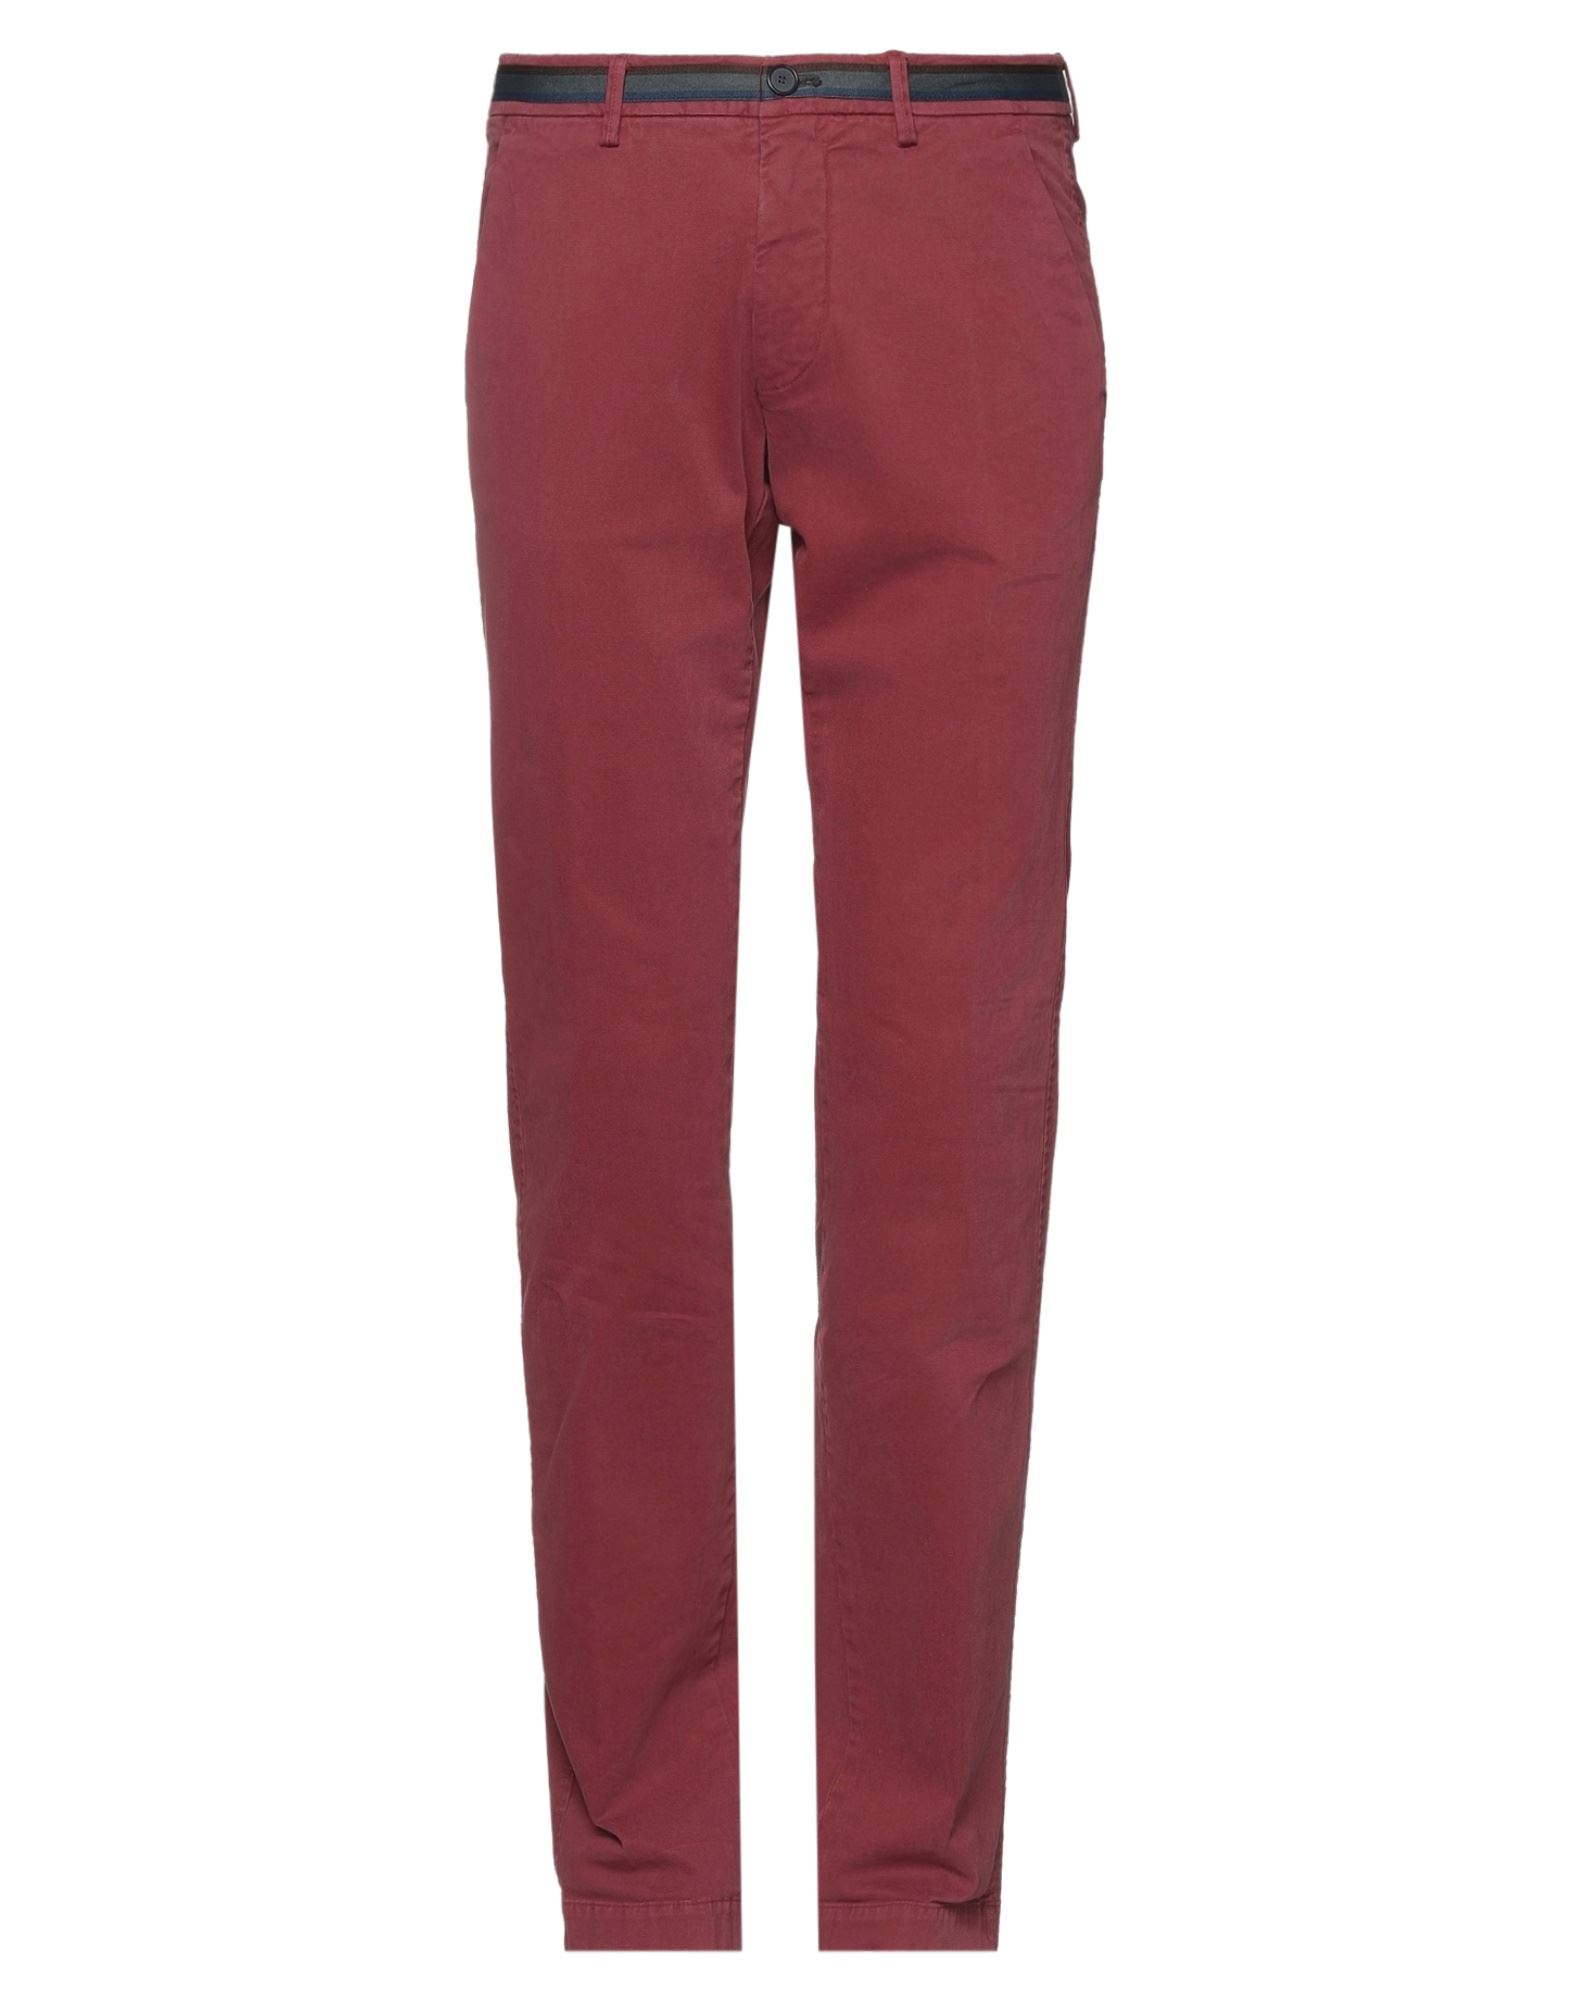 Em's Of Mason's Pants In Brick Red